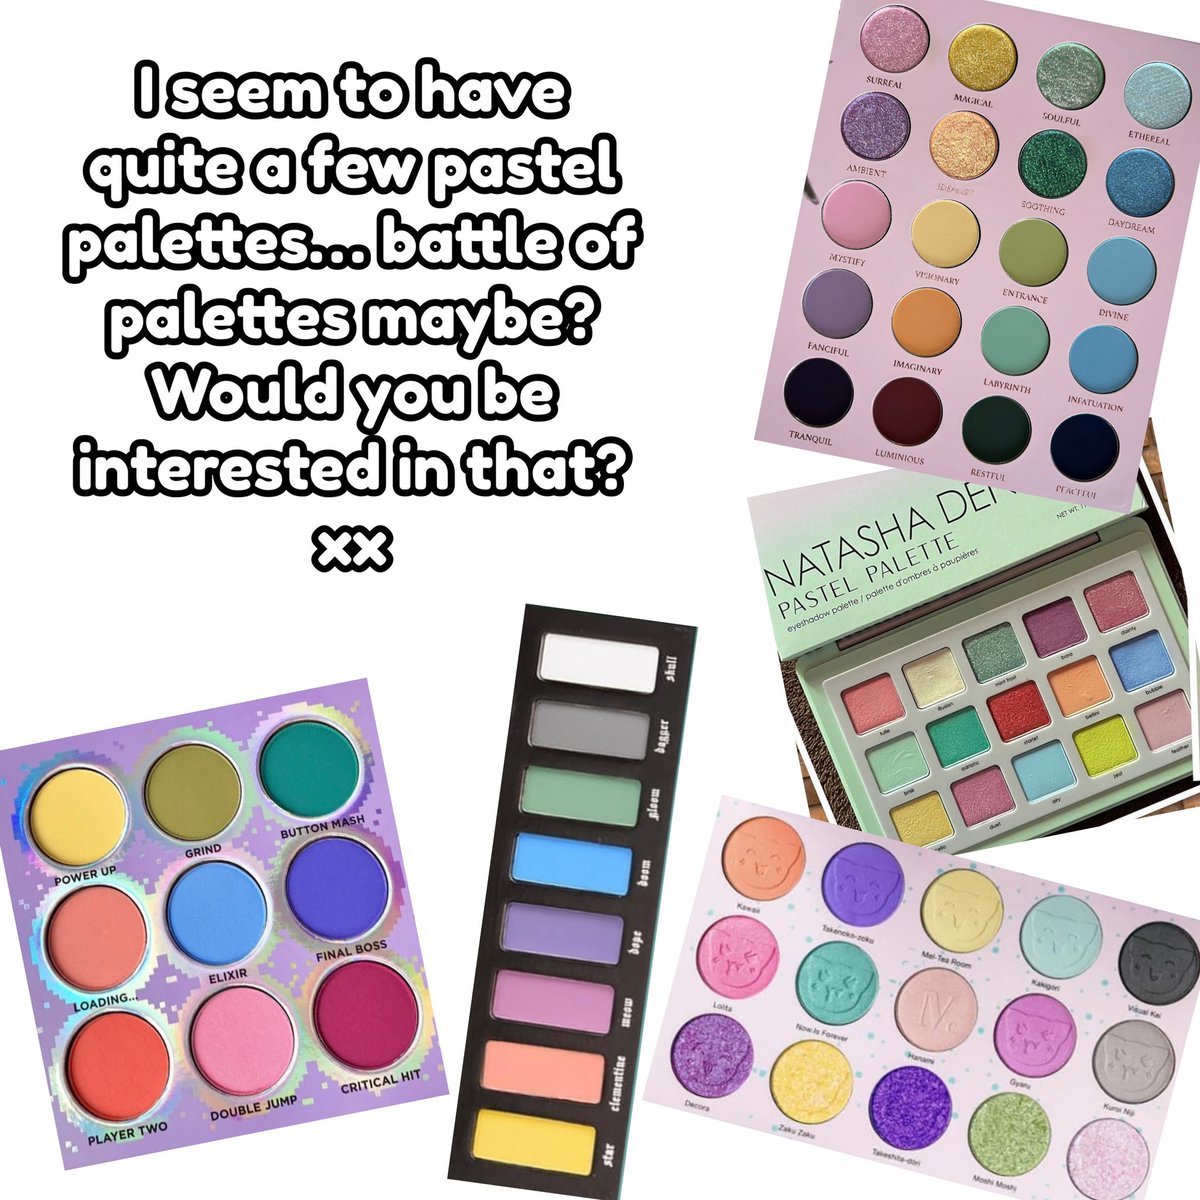 I seem to have quite a few #pastel palettes… battle of palettes maybe? Would you be interested in that? xx #4fBeauty